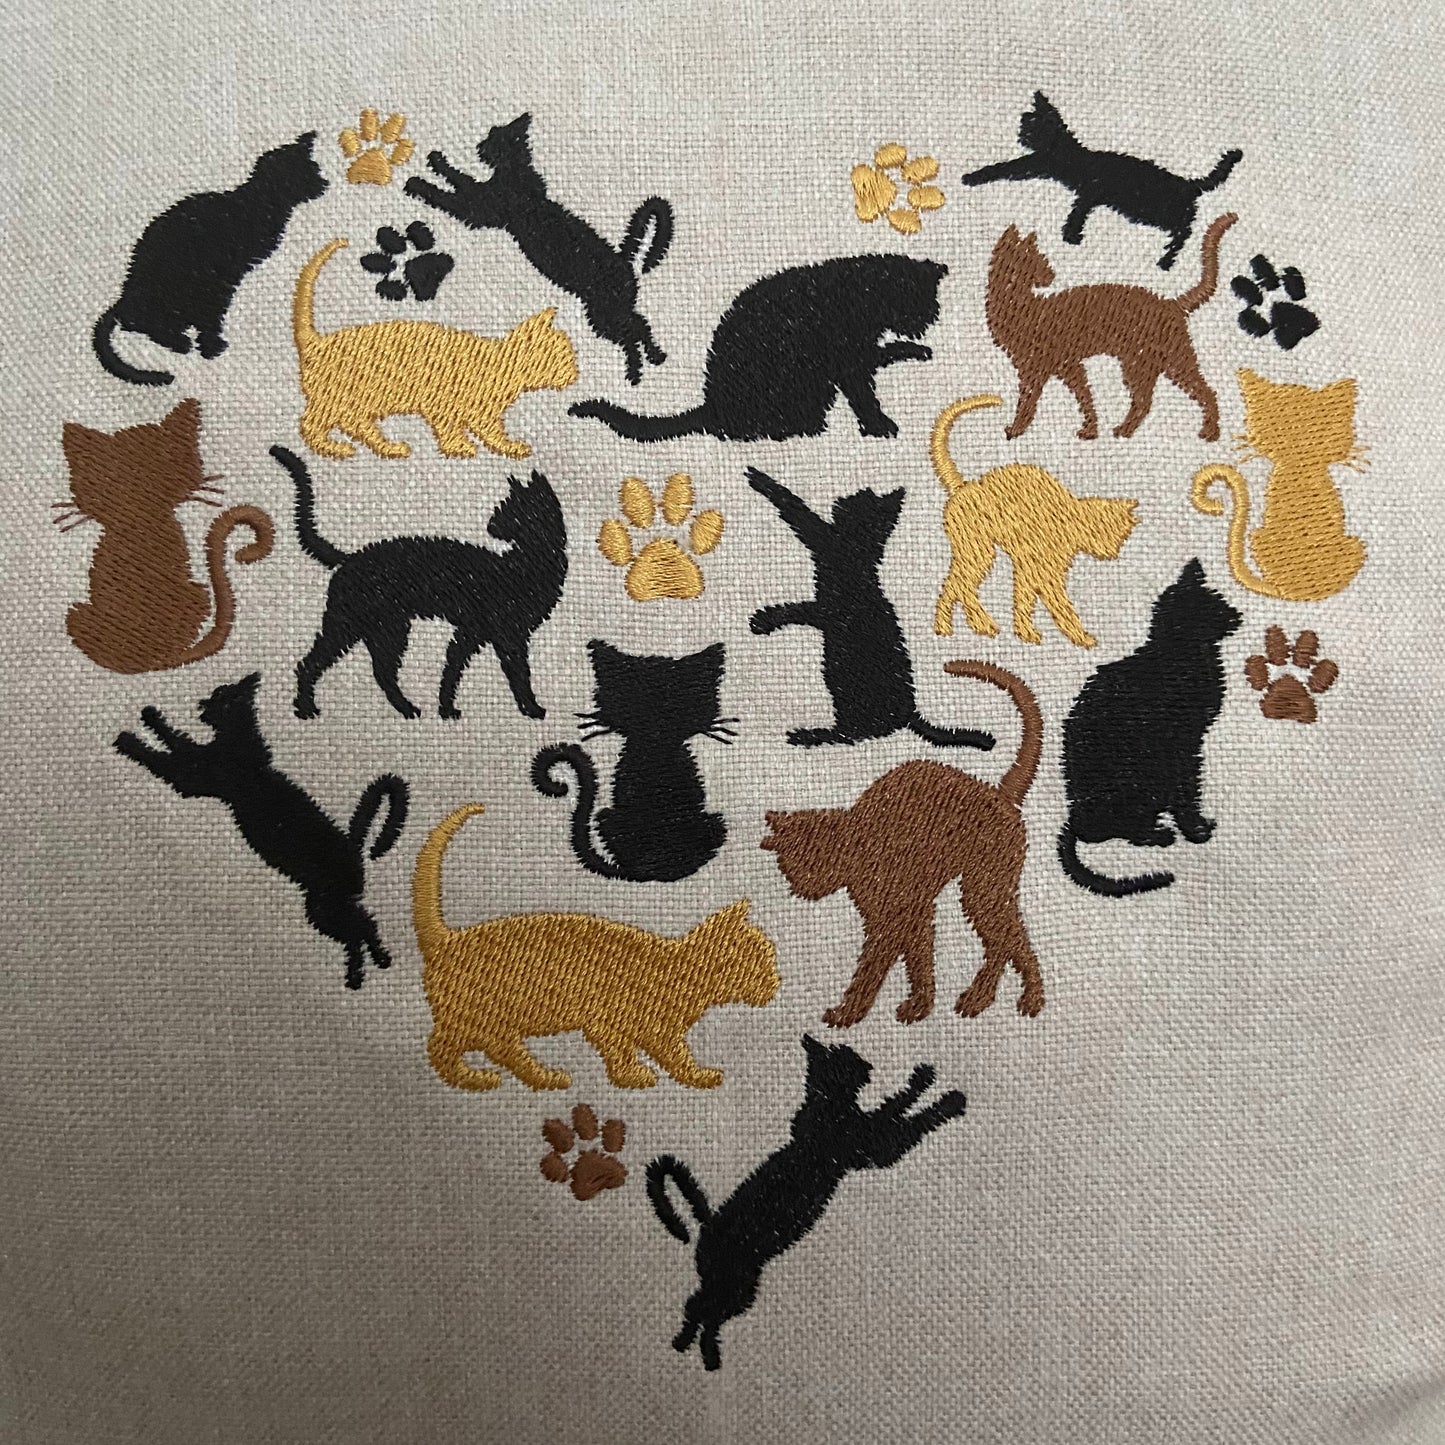 Silhouette Cat Embroidered Cushion Cover - 45cm x 45cm